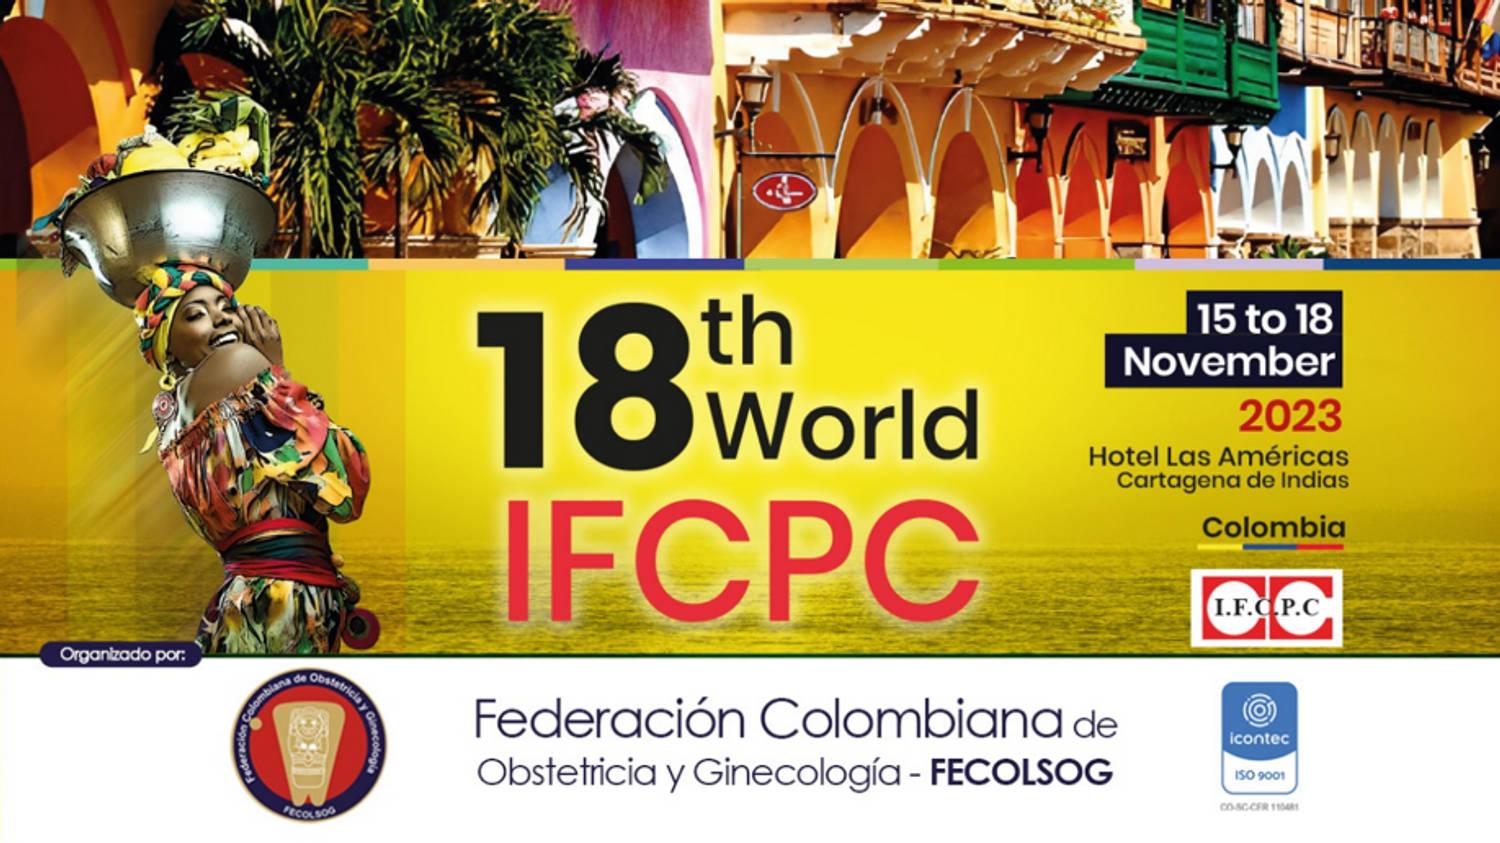 The 18th World Congress for Cervical Pathology and Colposcopy